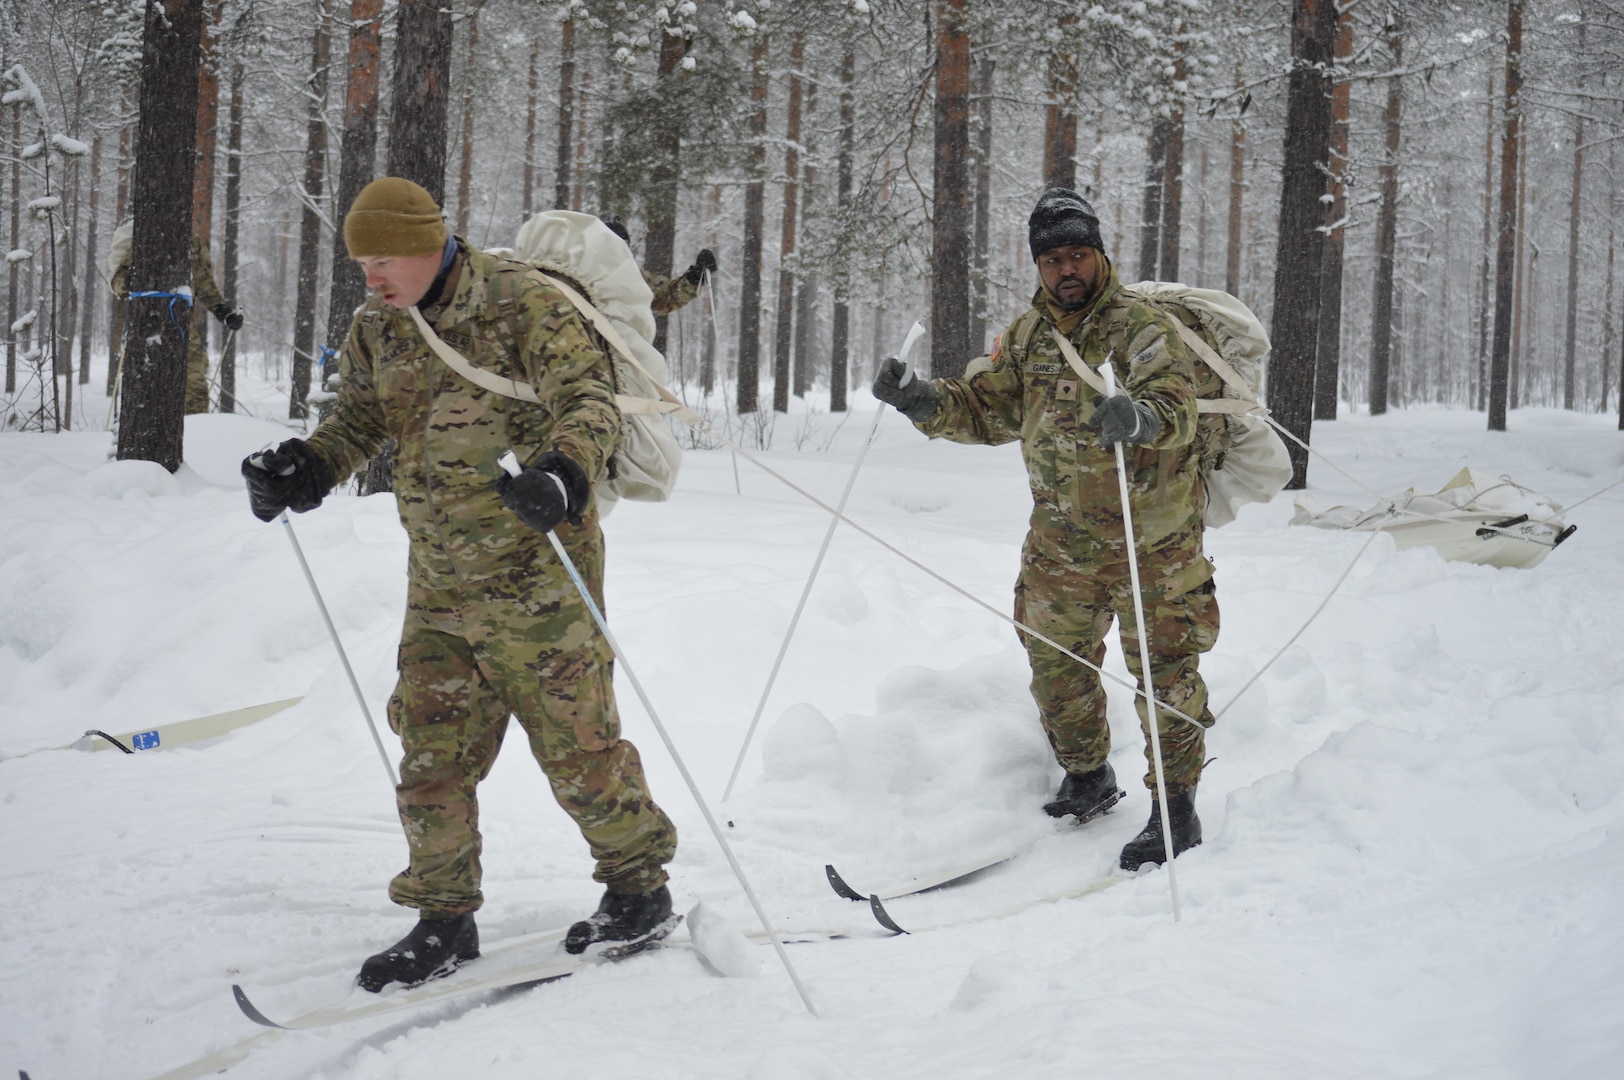 Saber Soldiers participate in Arctic Forge exercise in Finland